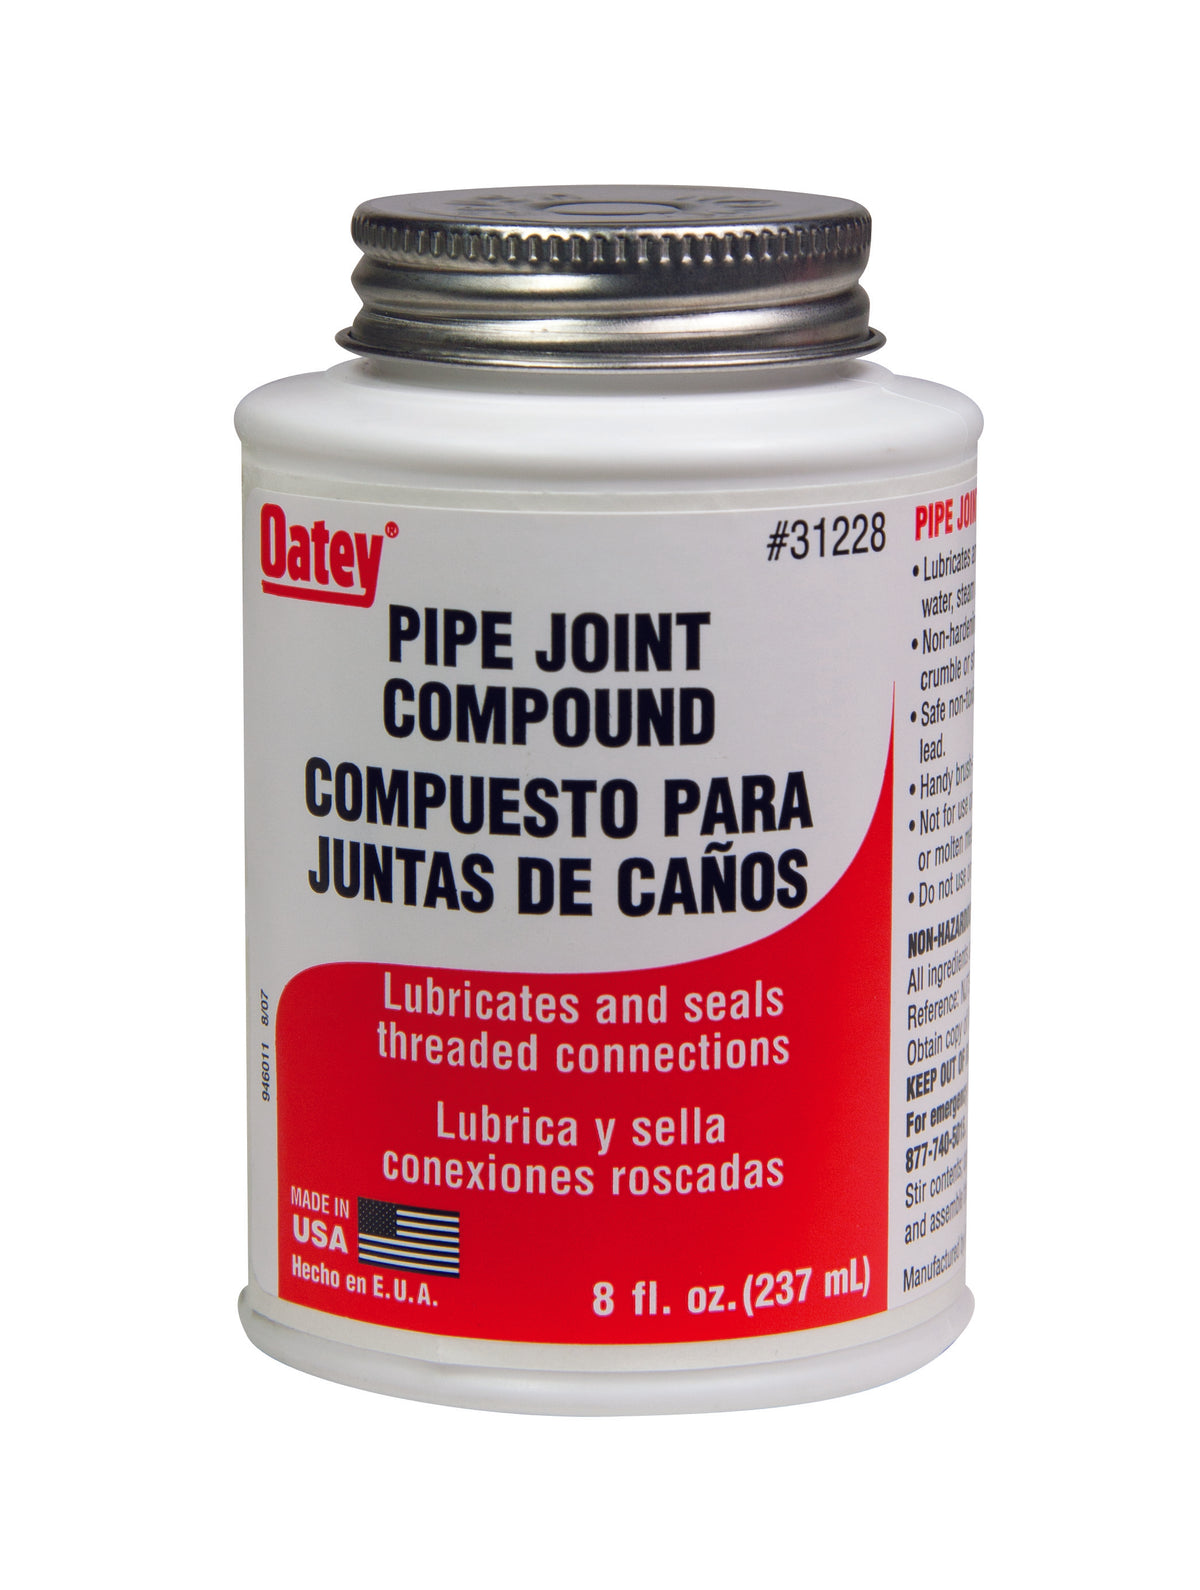 Buy oatey gray pipe joint compound - Online store for solvents & sealers, compounds in USA, on sale, low price, discount deals, coupon code